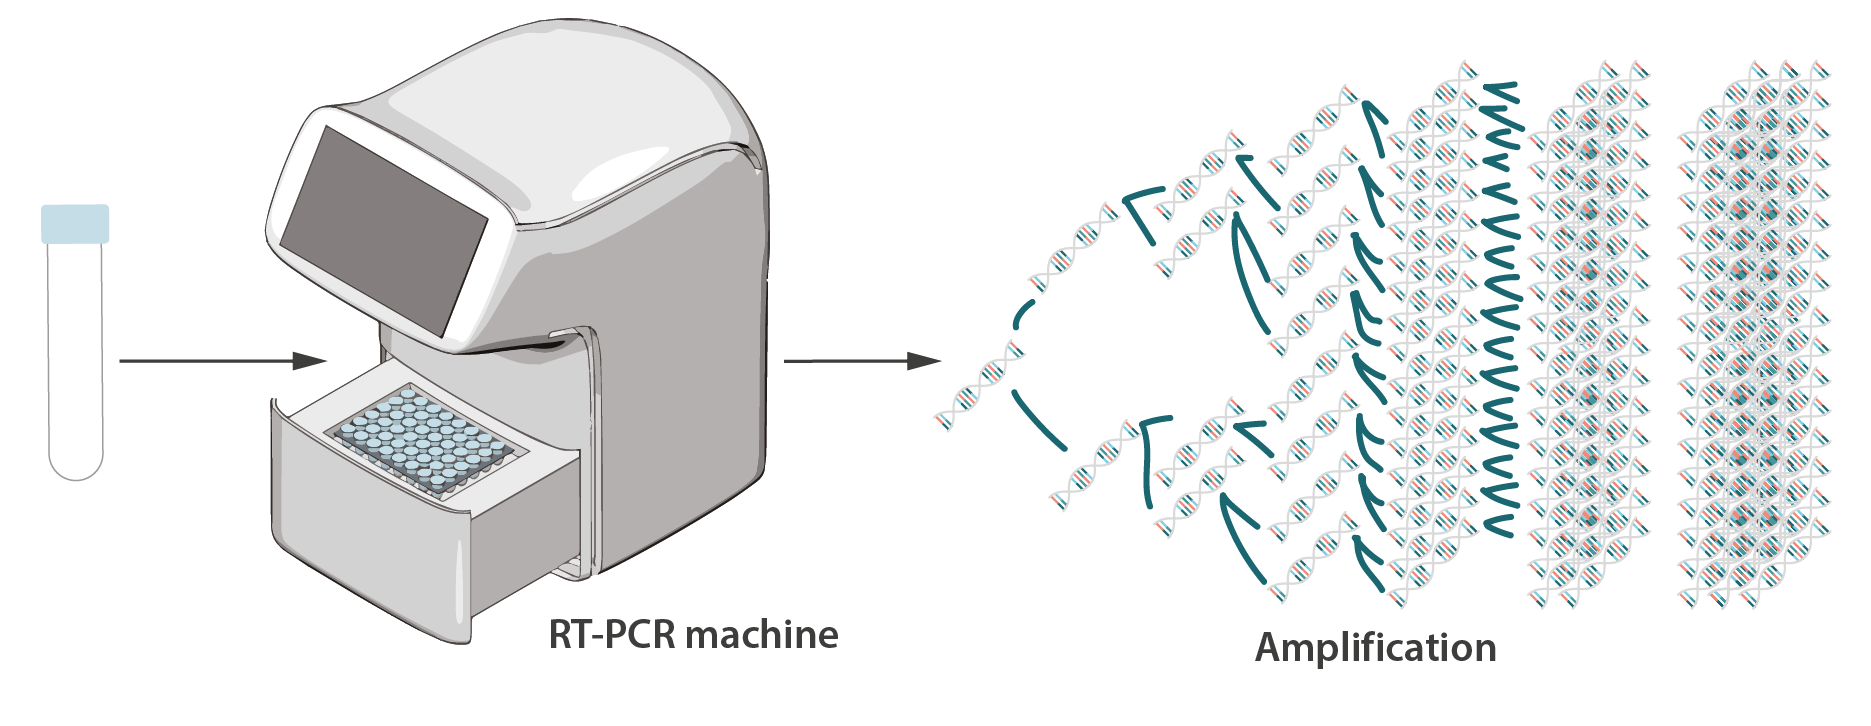 RT-PCR and Amplification